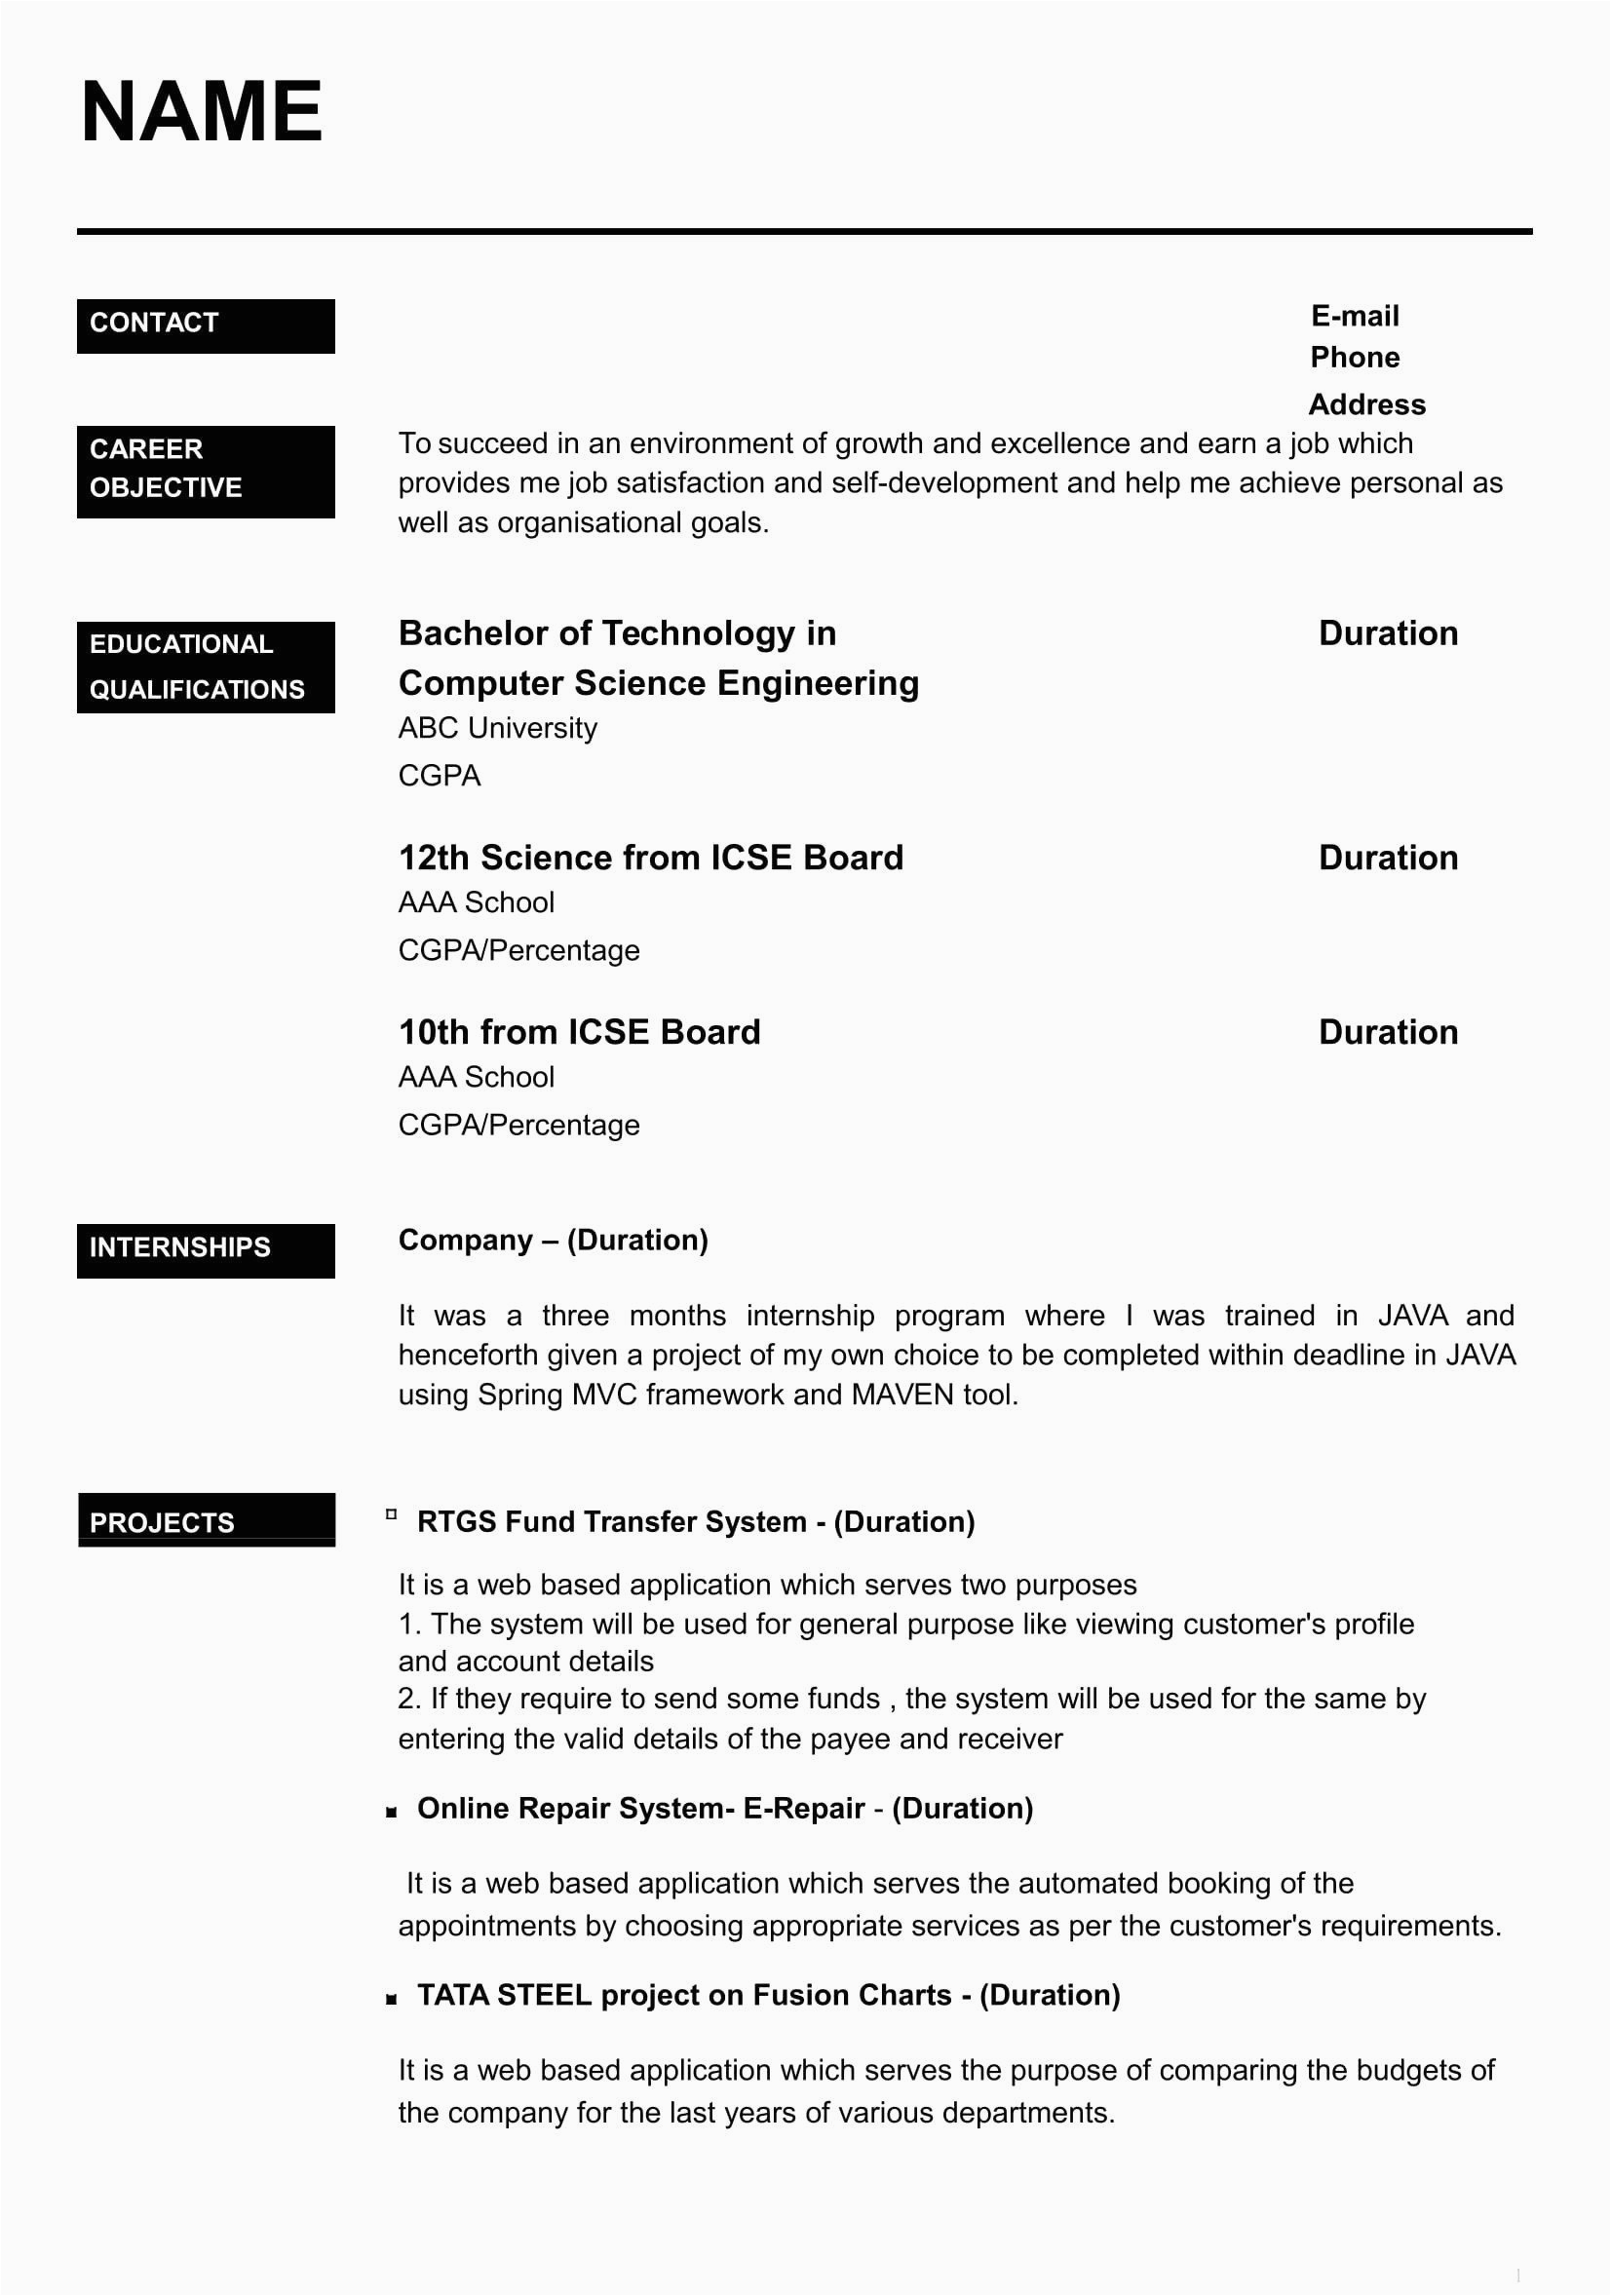 Changing the formatting On A Preformatted Sample Resume Cv format Latest 2021 Cvcrot